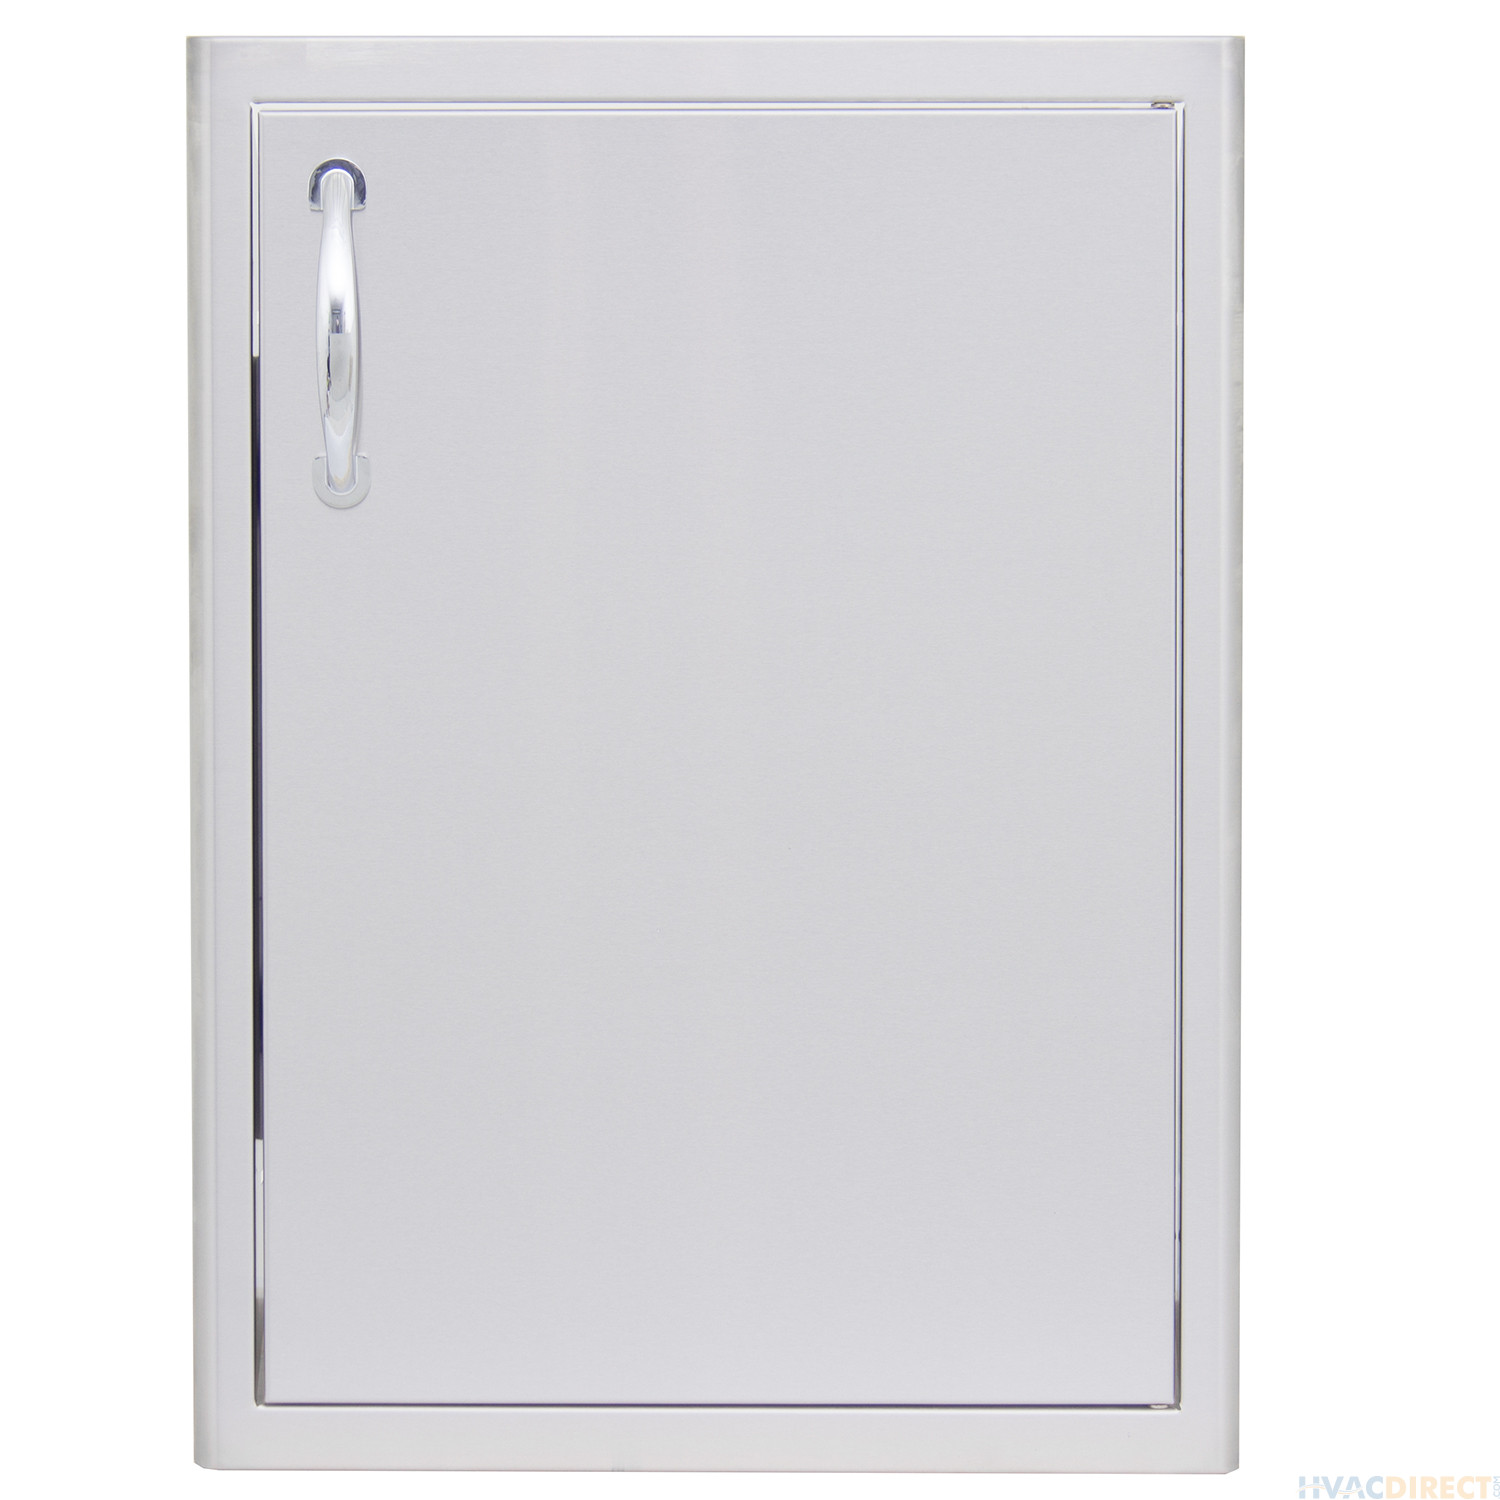 Blaze 18-Inch Right Hinged Stainless Steel Single Access Door - Vertical - BLZ-SV-1420-R